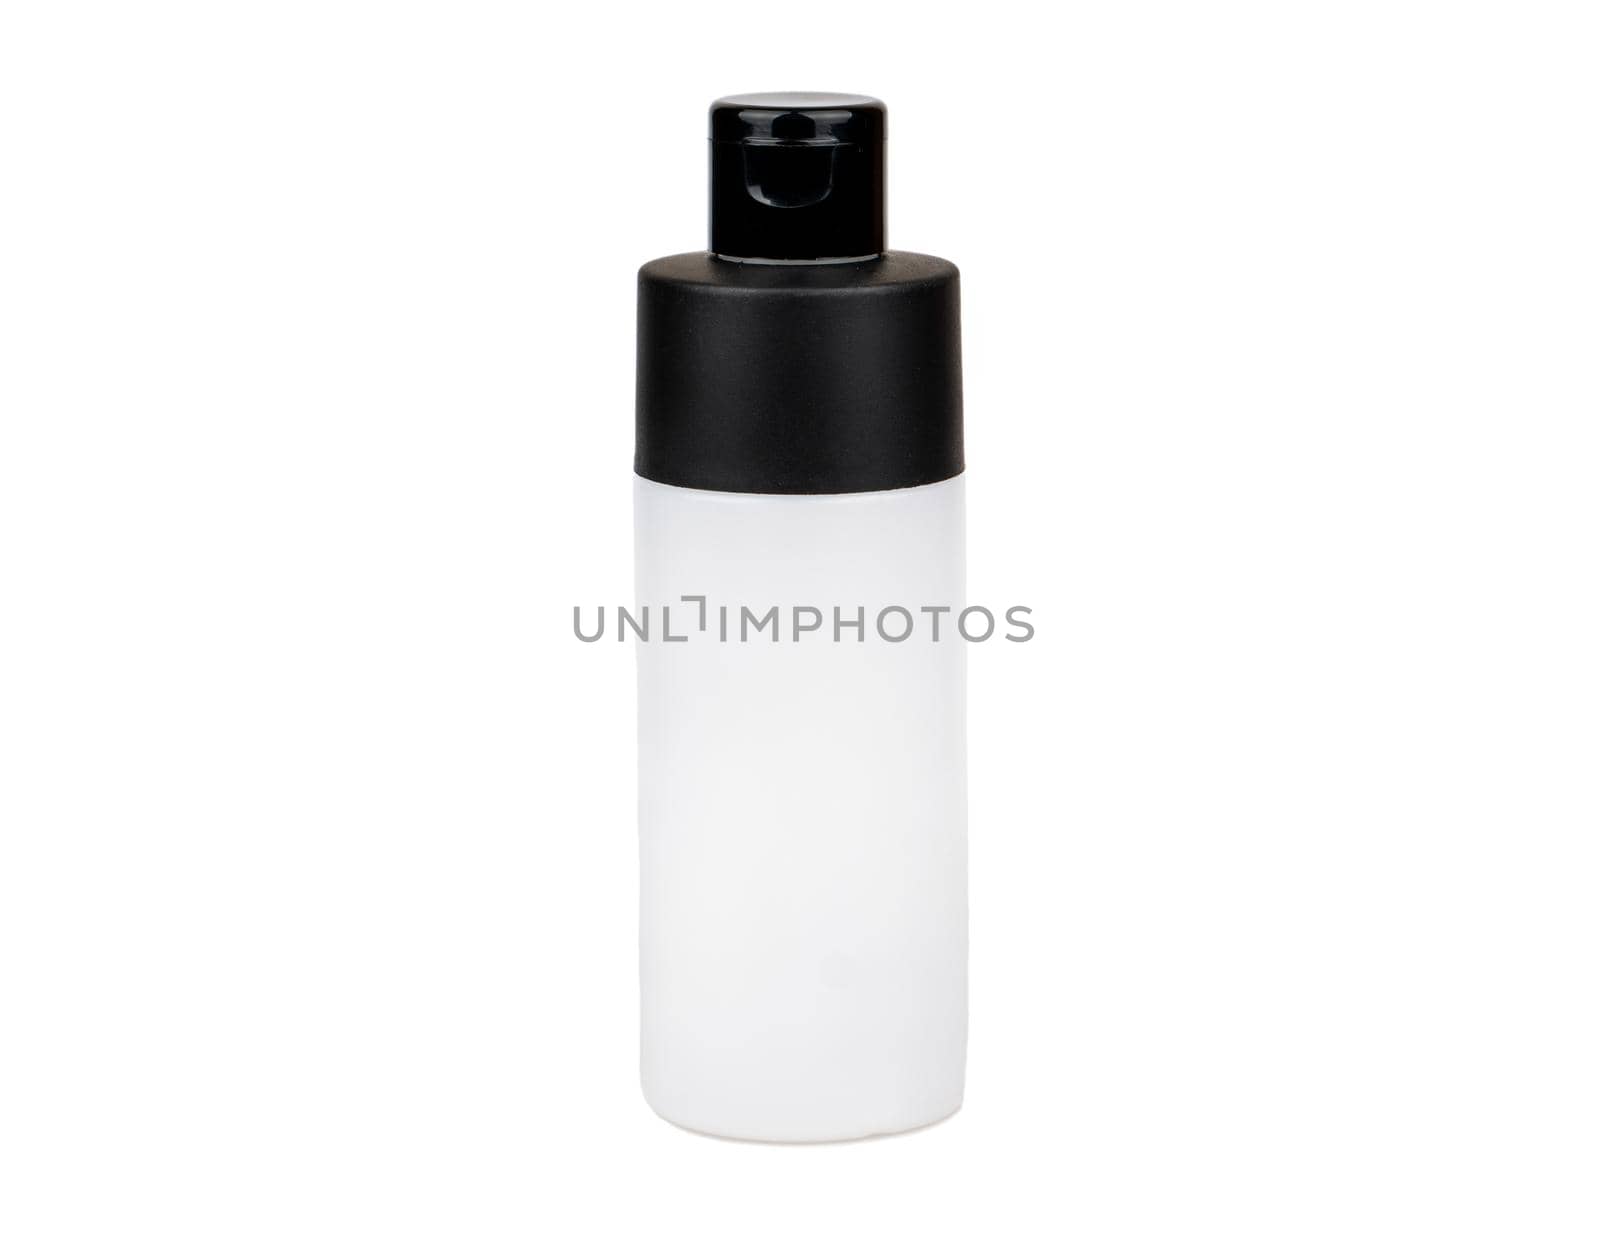 Plastic cosmetic bottles by andregric